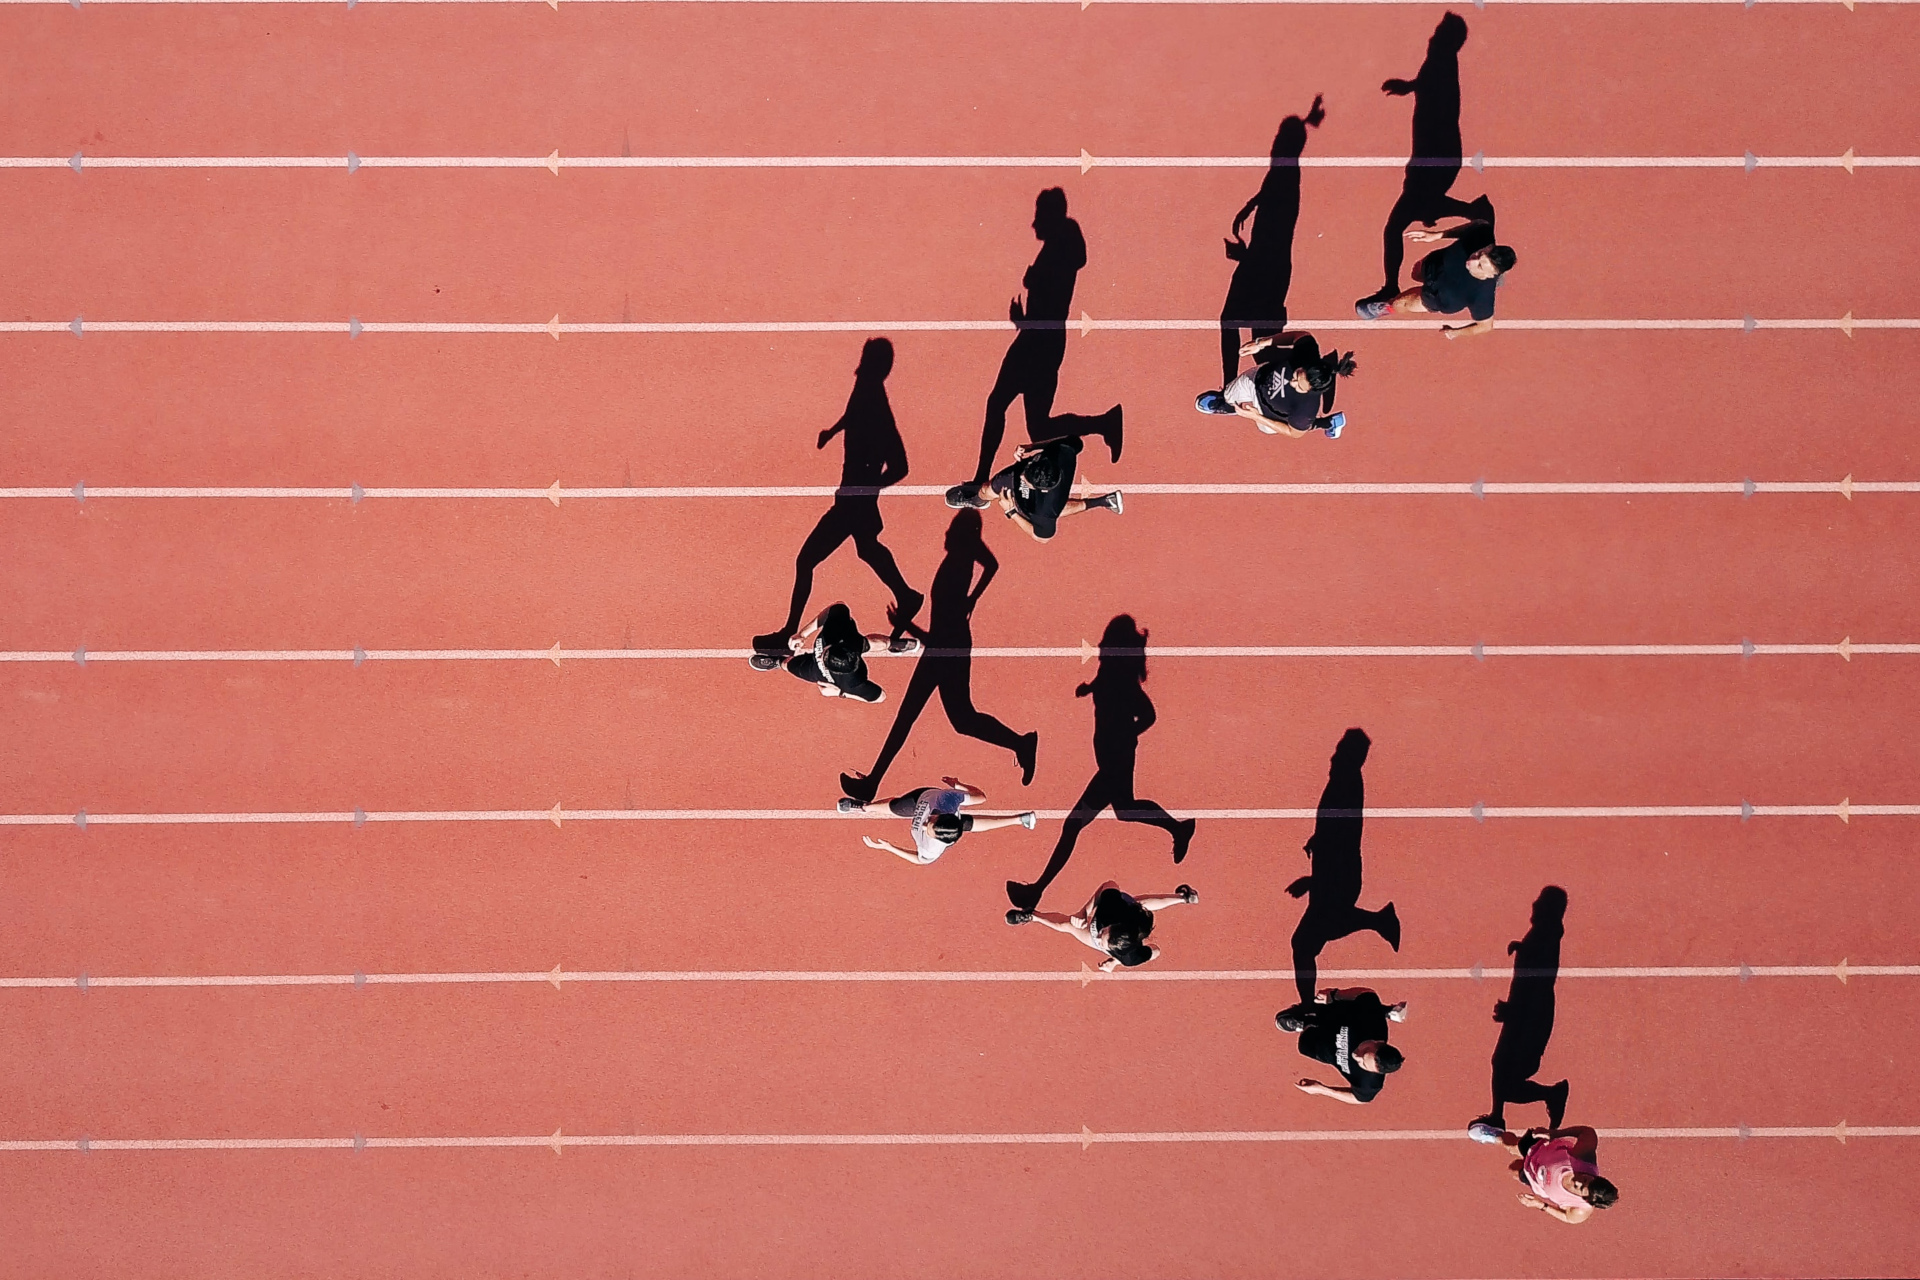 Overhead view of people running on red racetrack